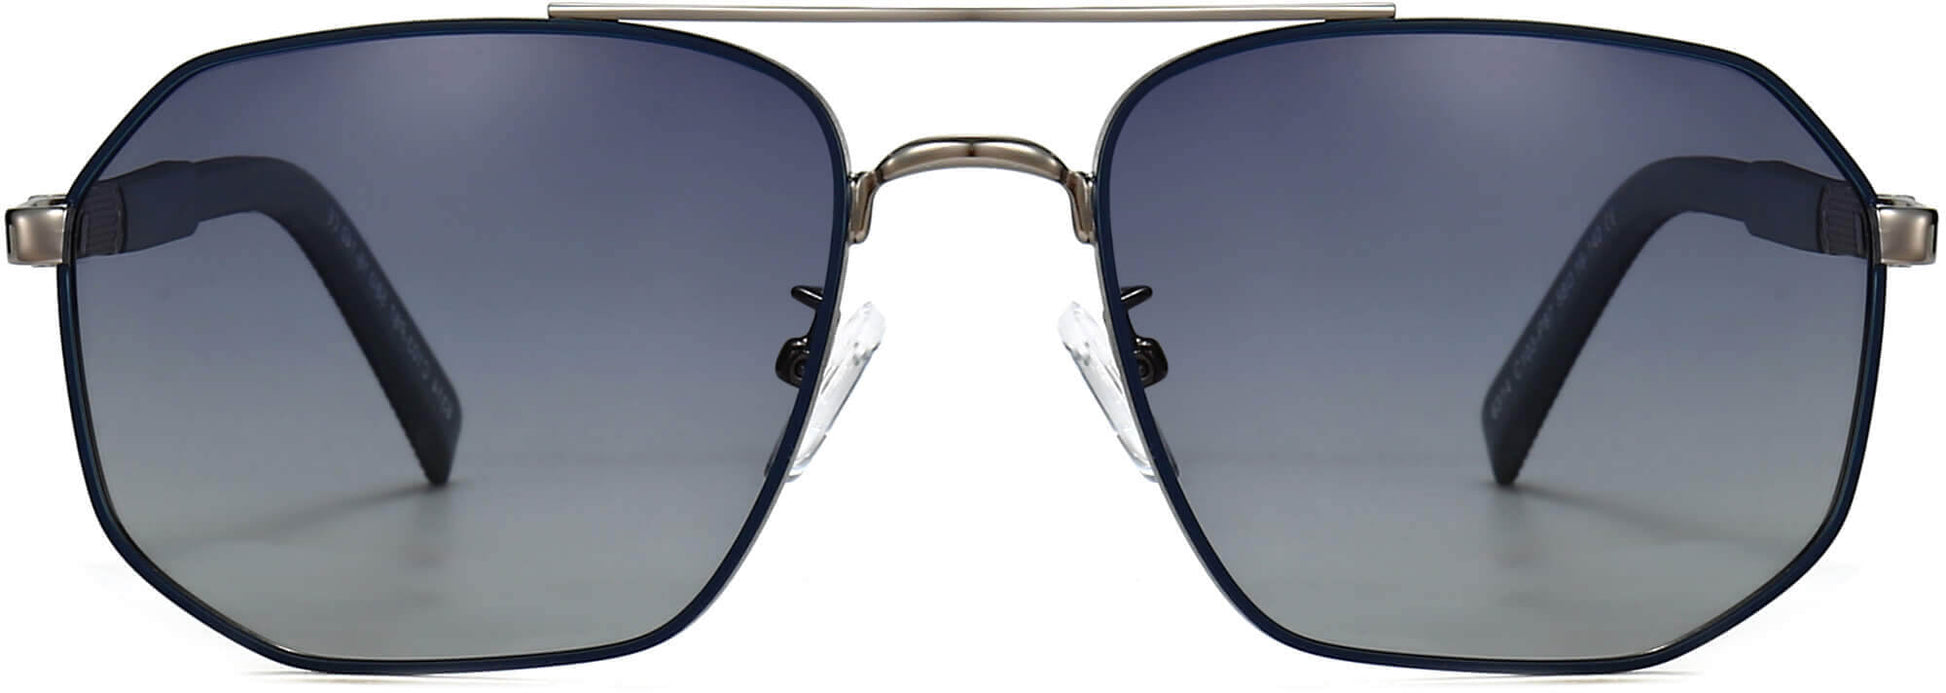 Luis Silver Stainless steel Sunglasses from ANRRI, front view